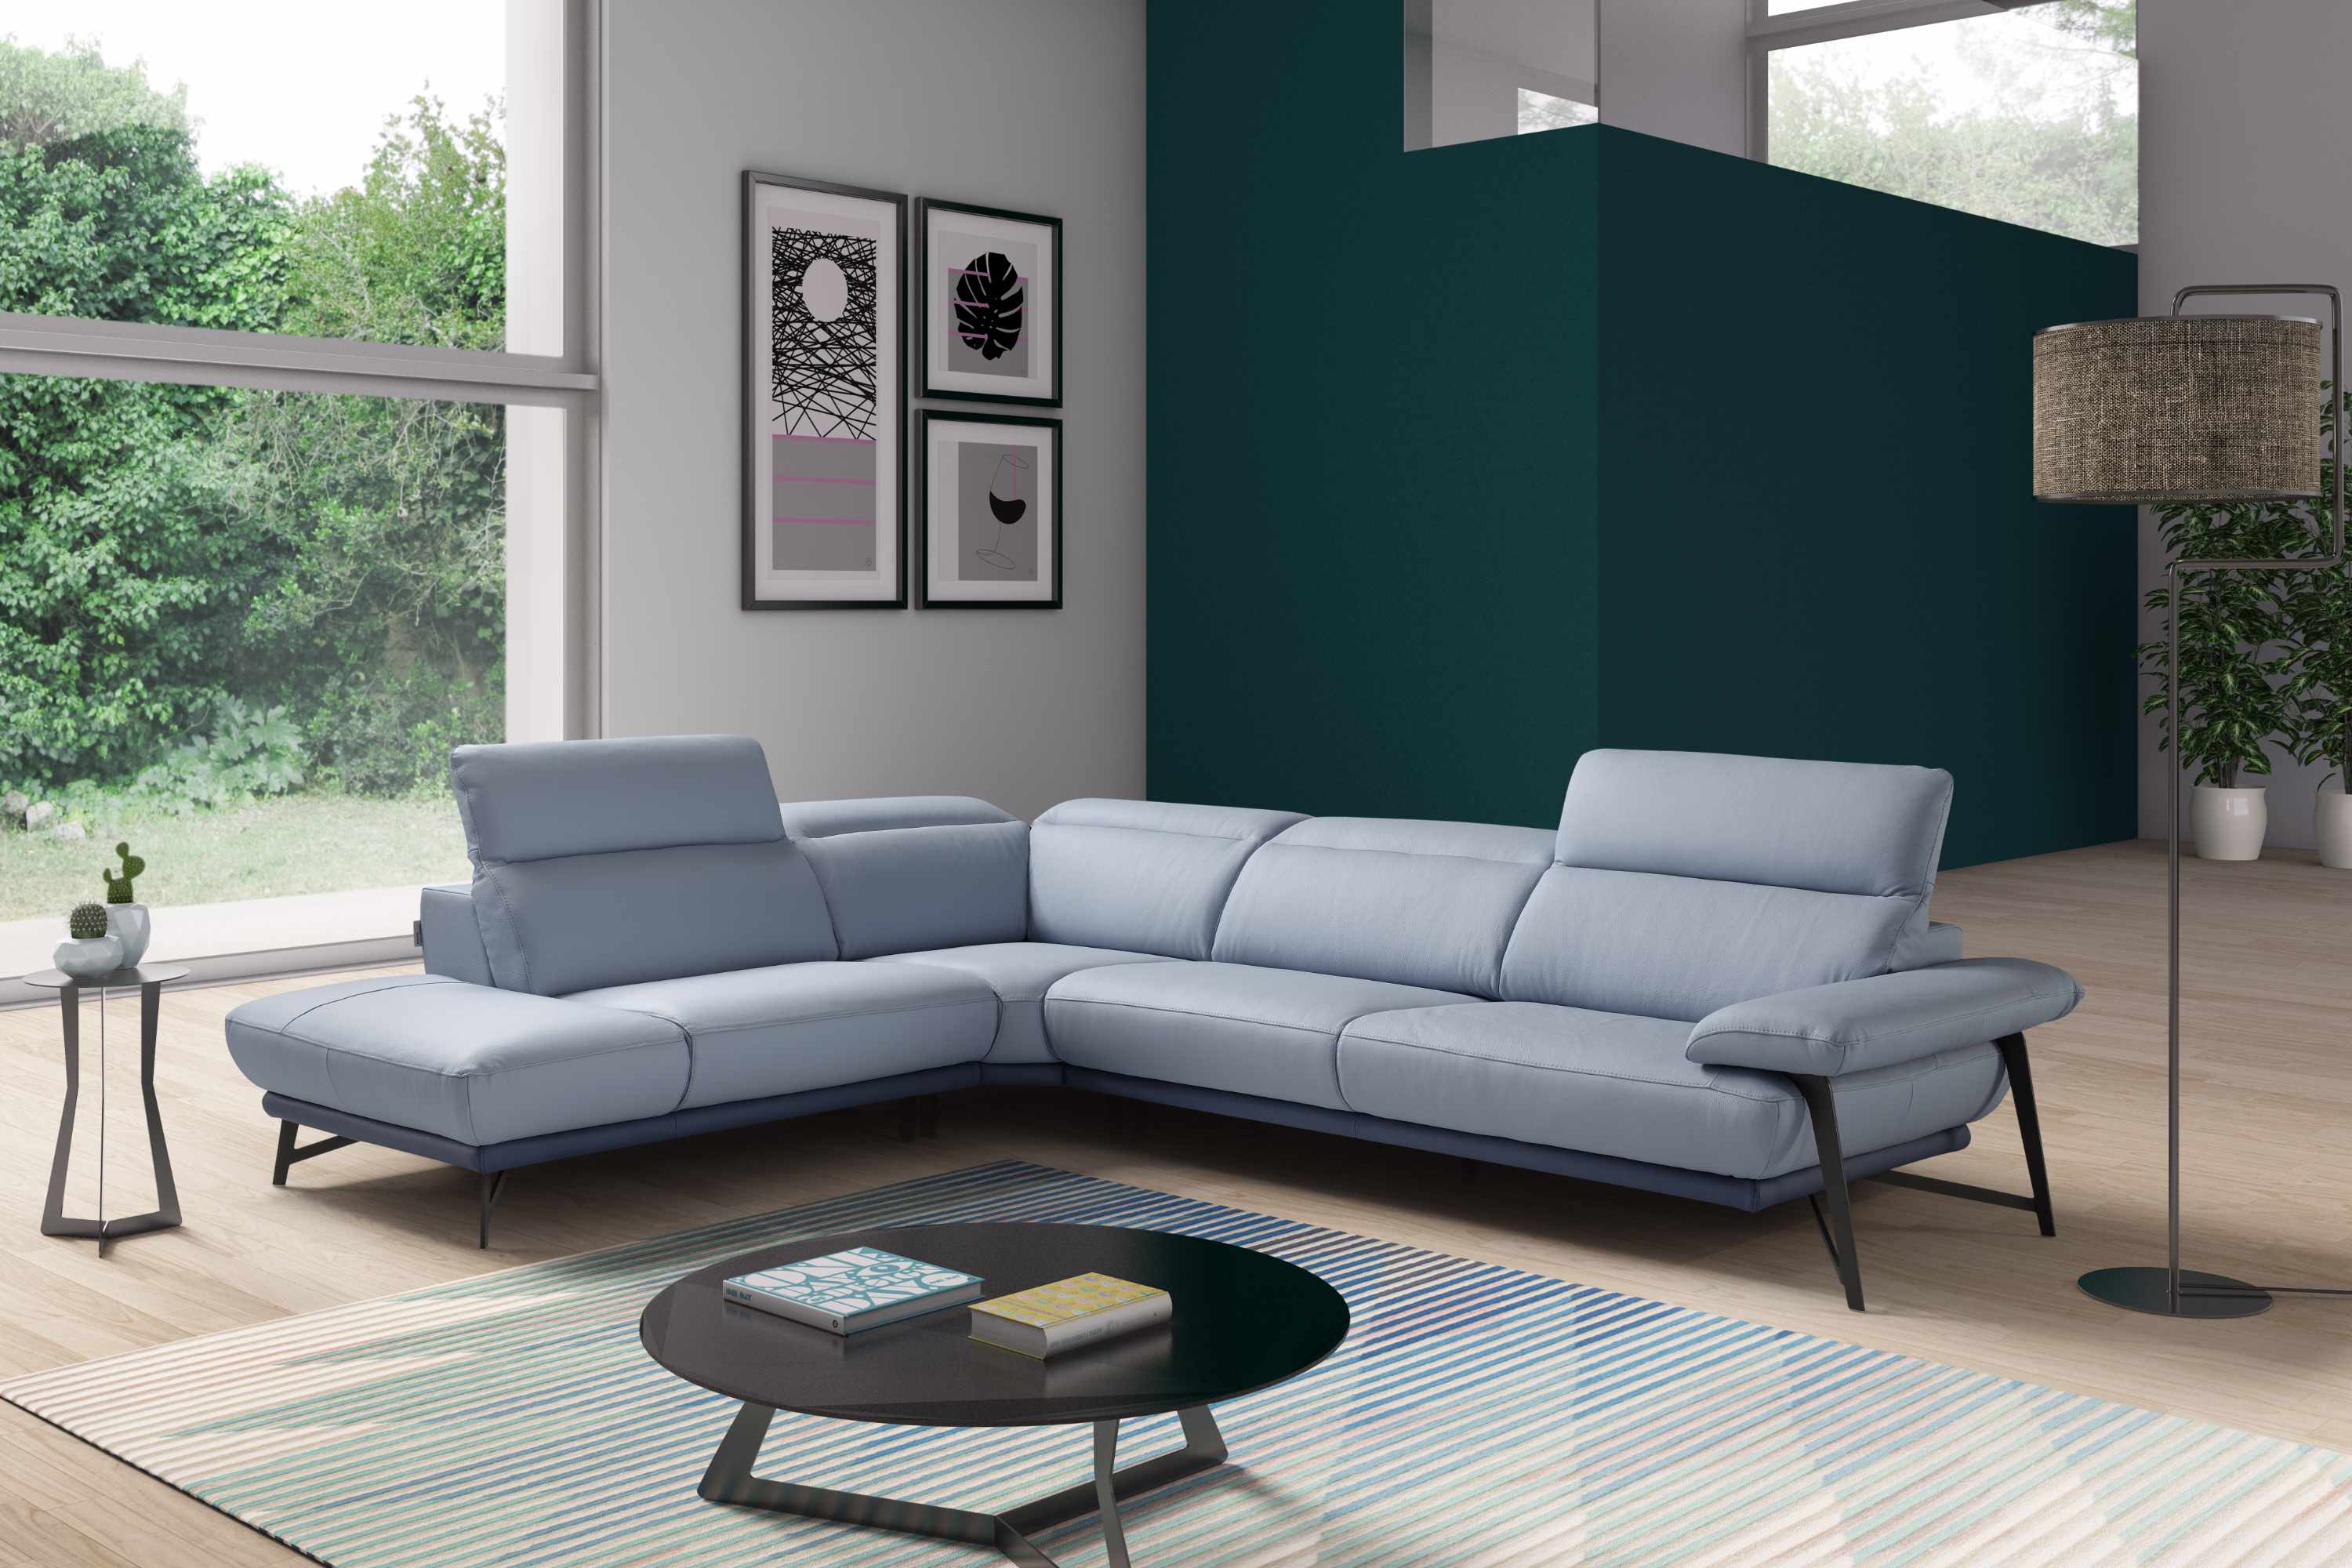 The Anais luxury sofa made in italy